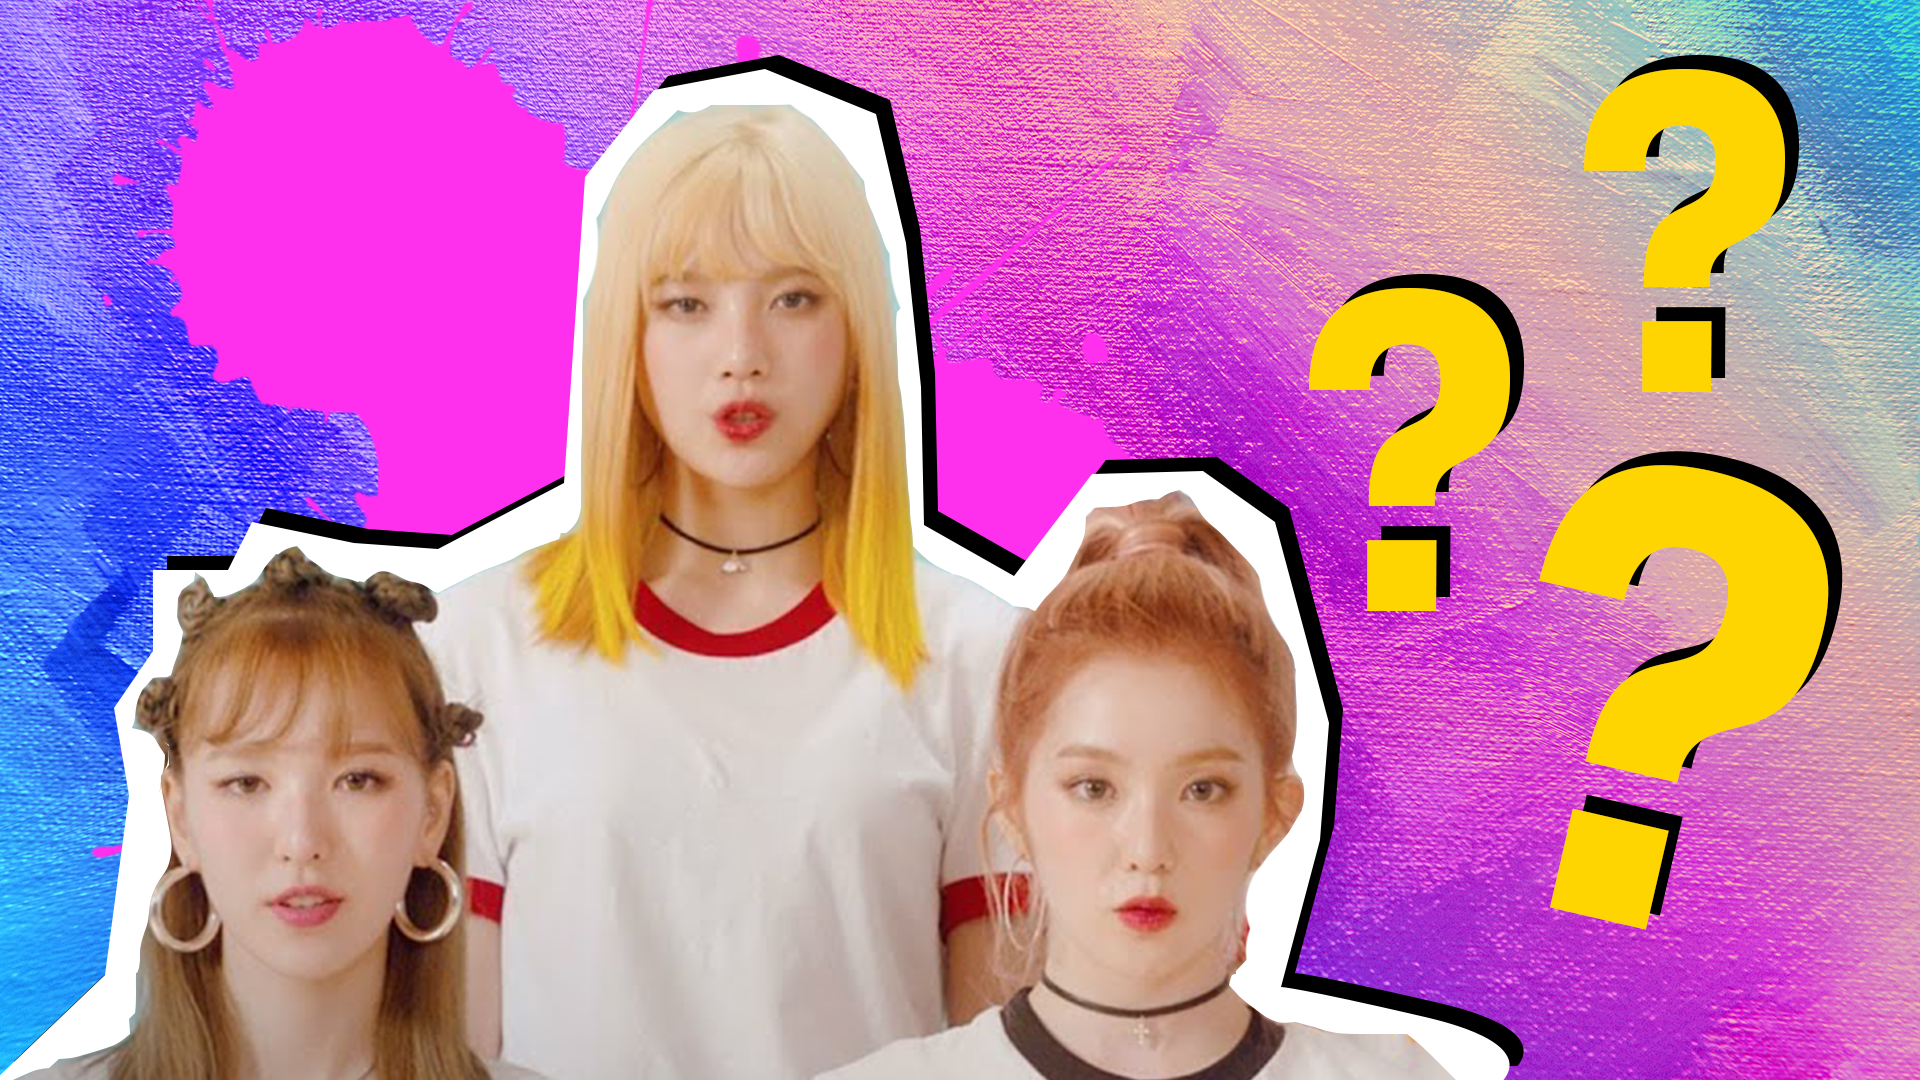 How Would BTS Sing 'Russian Roulette' by Red Velvet Lyrics